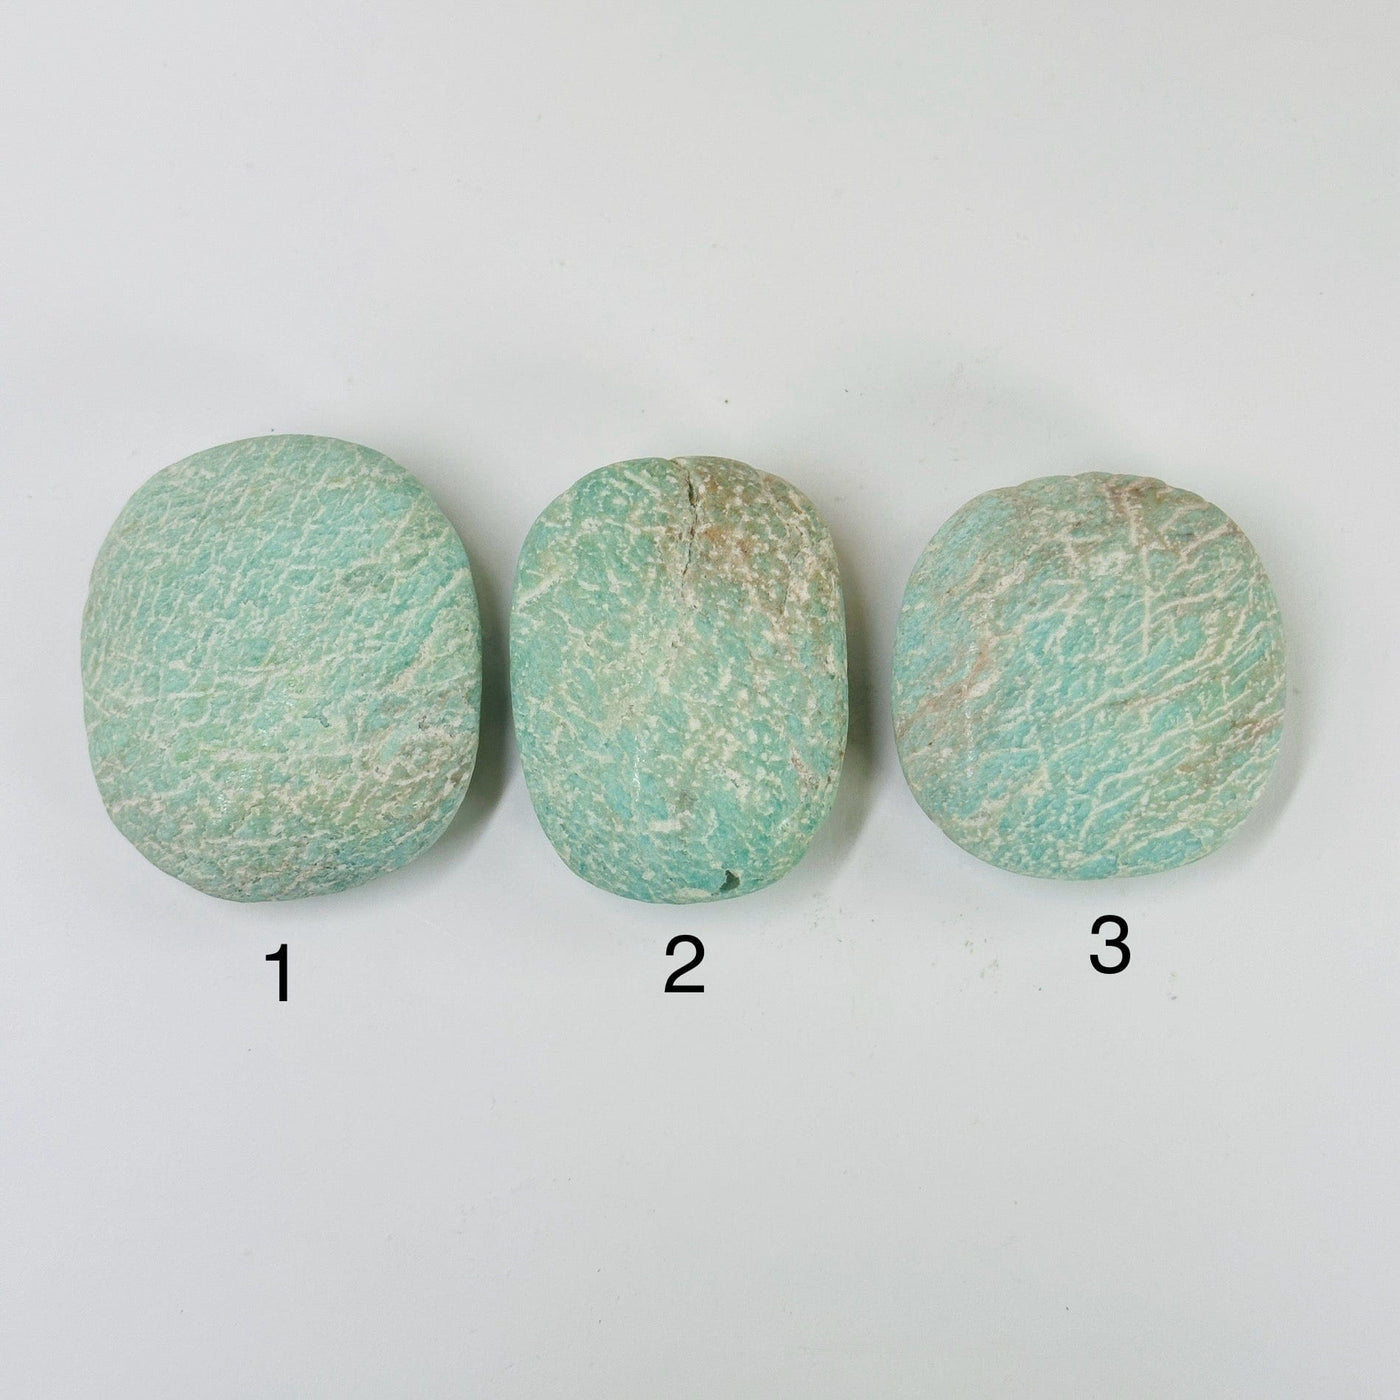 amazonite tumbled stones with decorations in the background